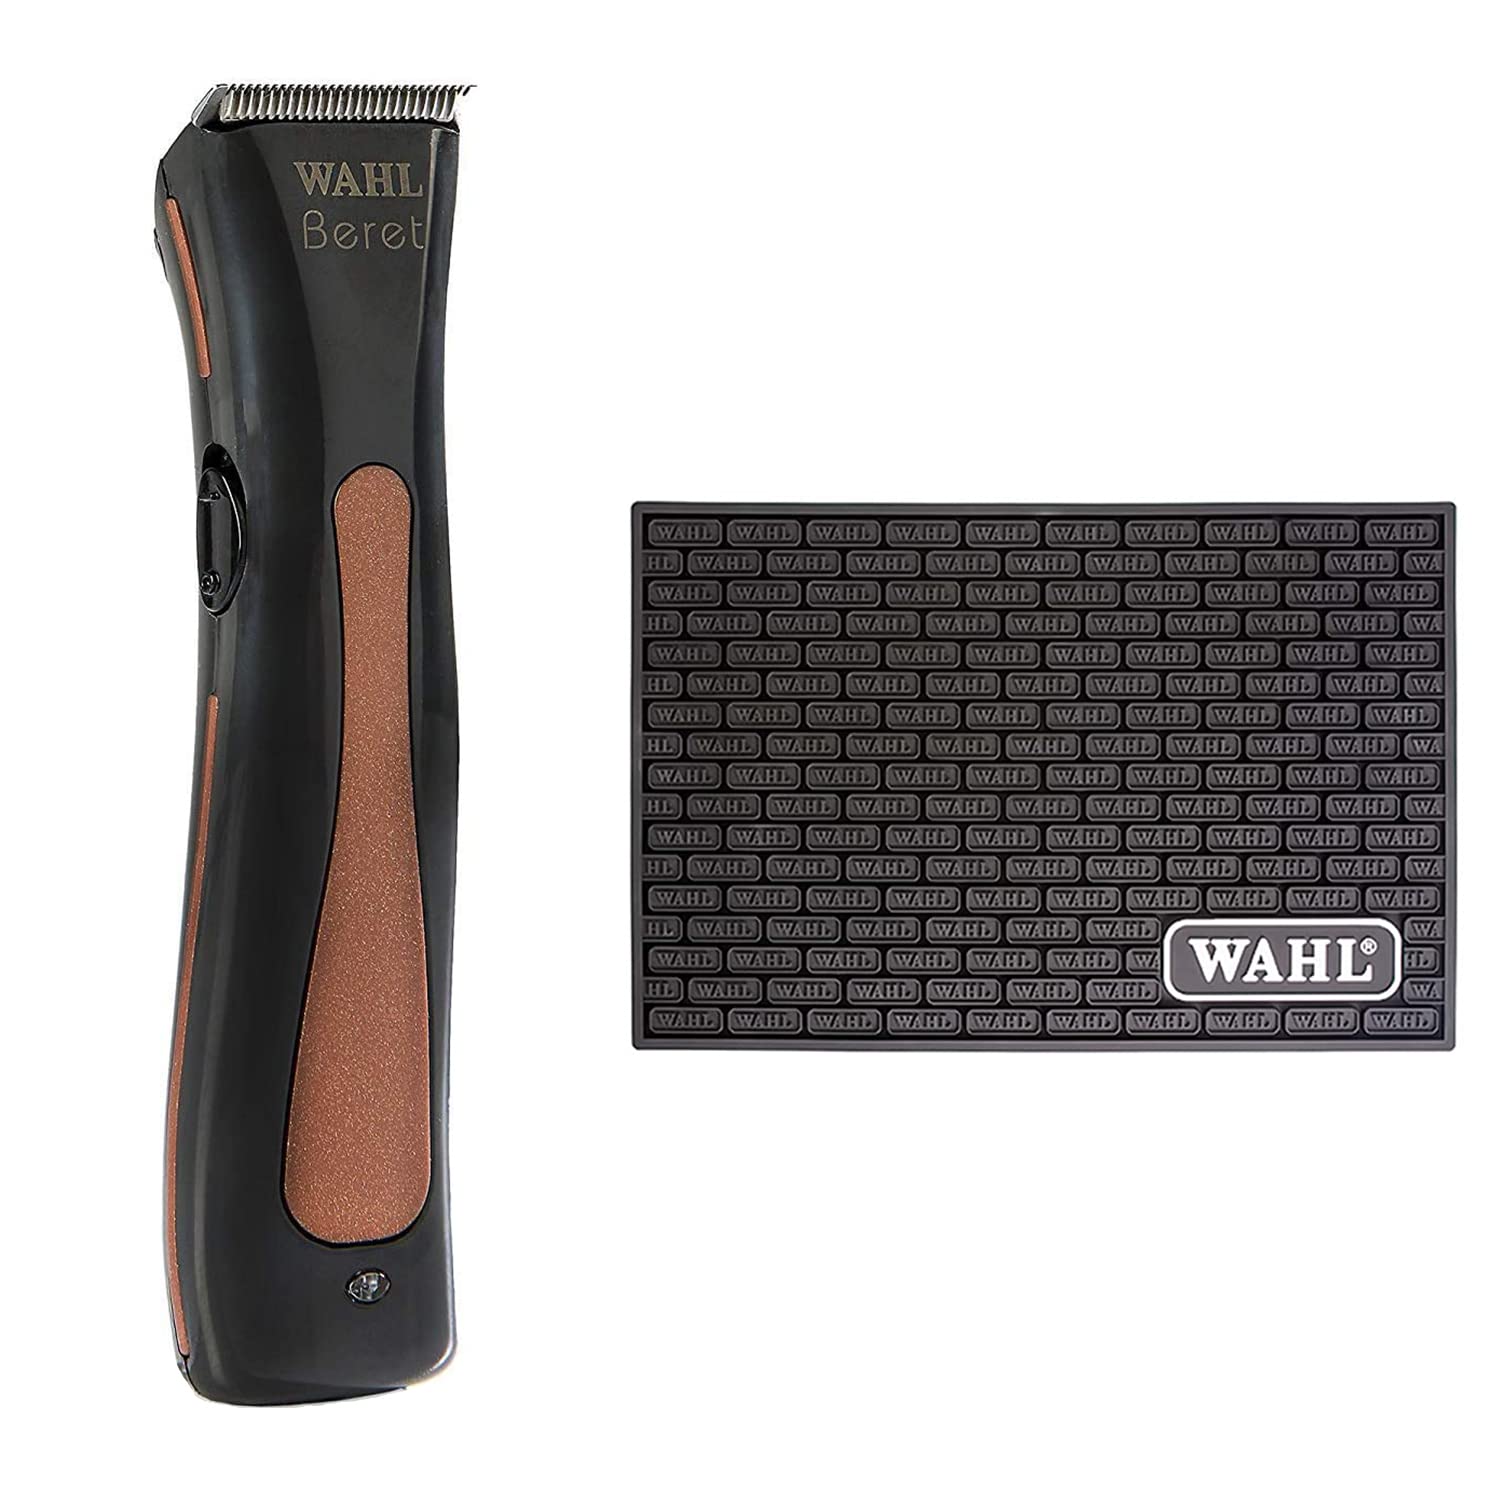 Wahl Professional Beret Cord Cordless Electric Trimmer Tool Mat for Clippers, Trimmers & Haircut Tools Bundle